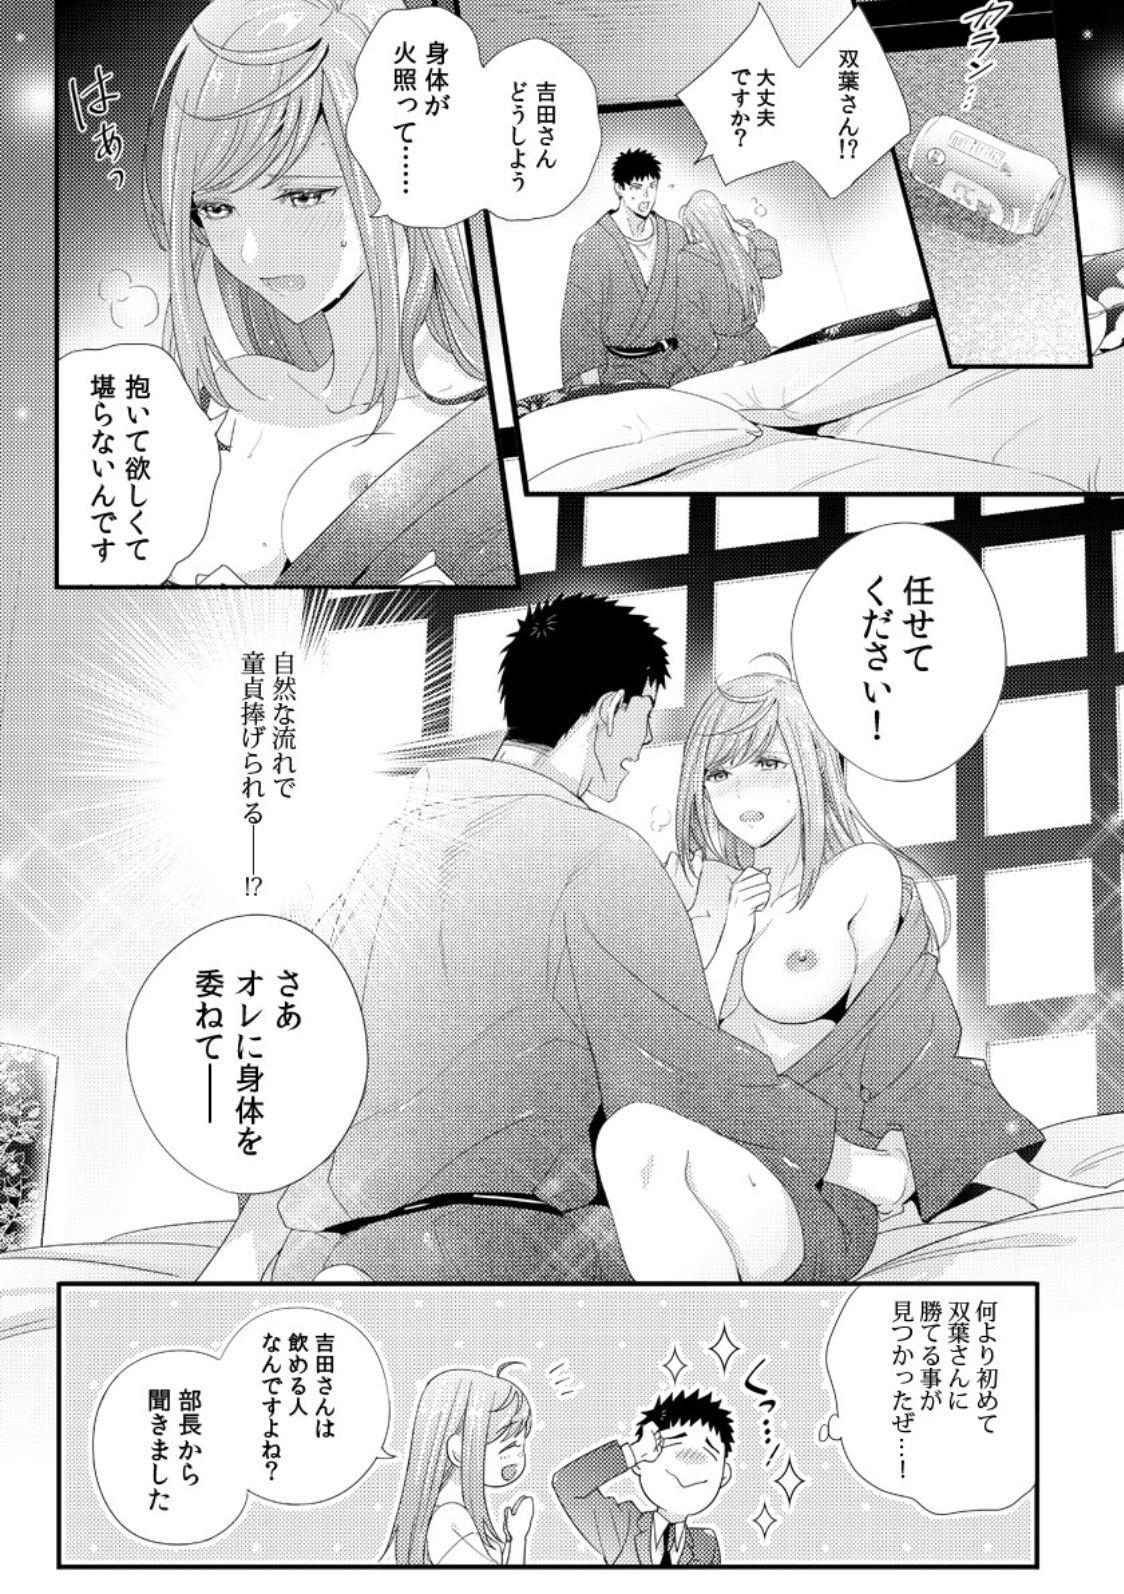 Please Let Me Hold You Futaba-San! Ch. 1-4 7